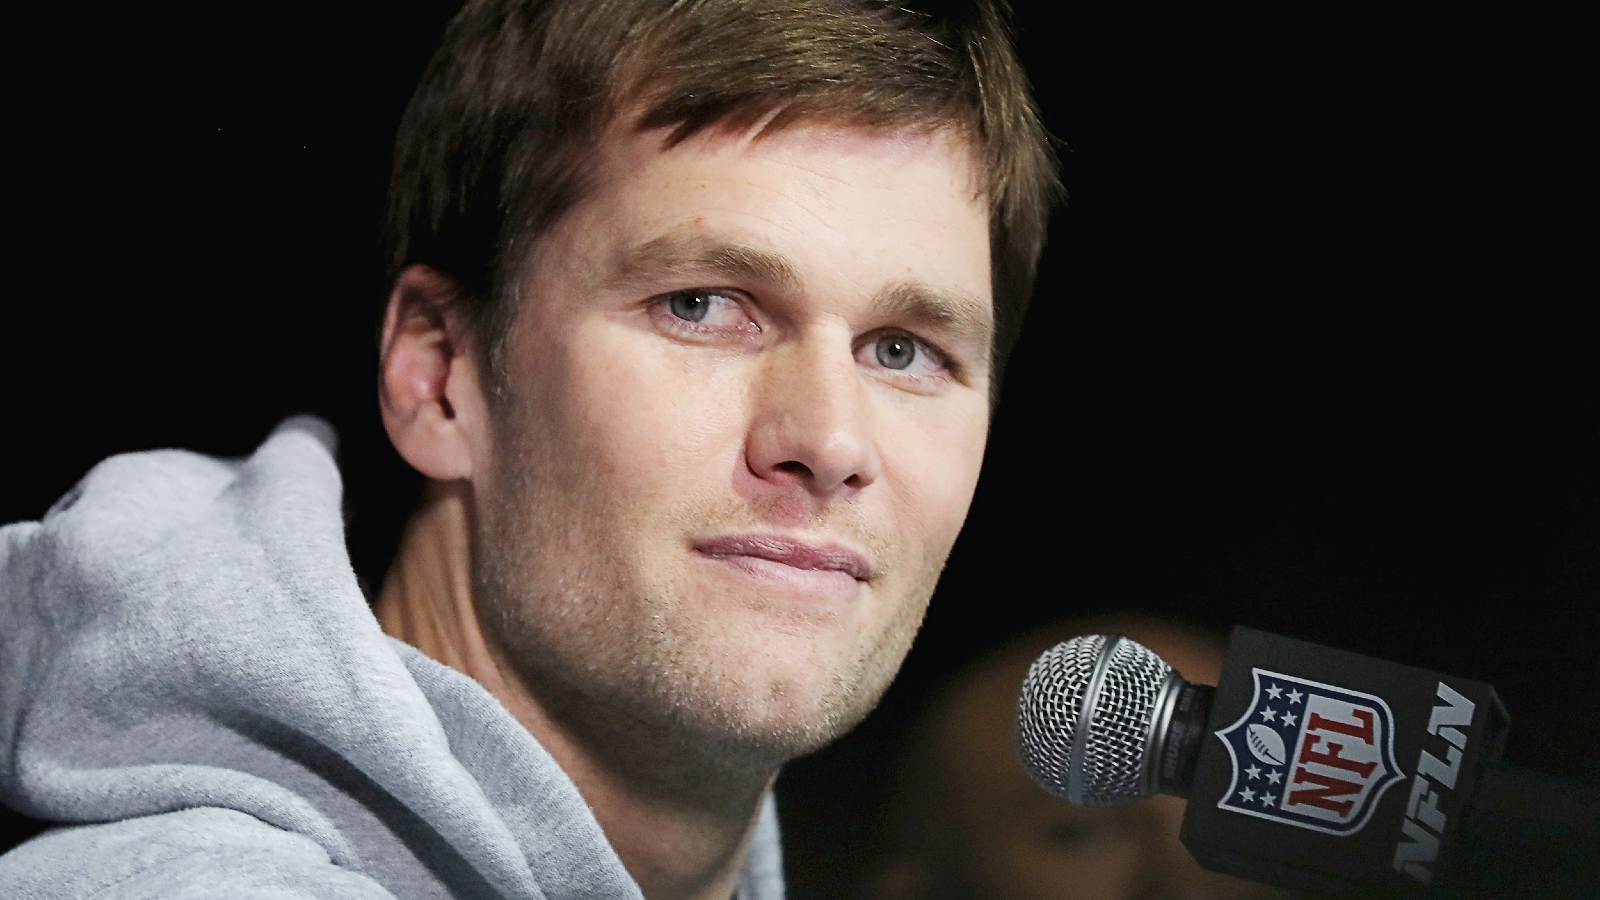 Tom Brady will become an NFL broadcaster for Fox after he retires.